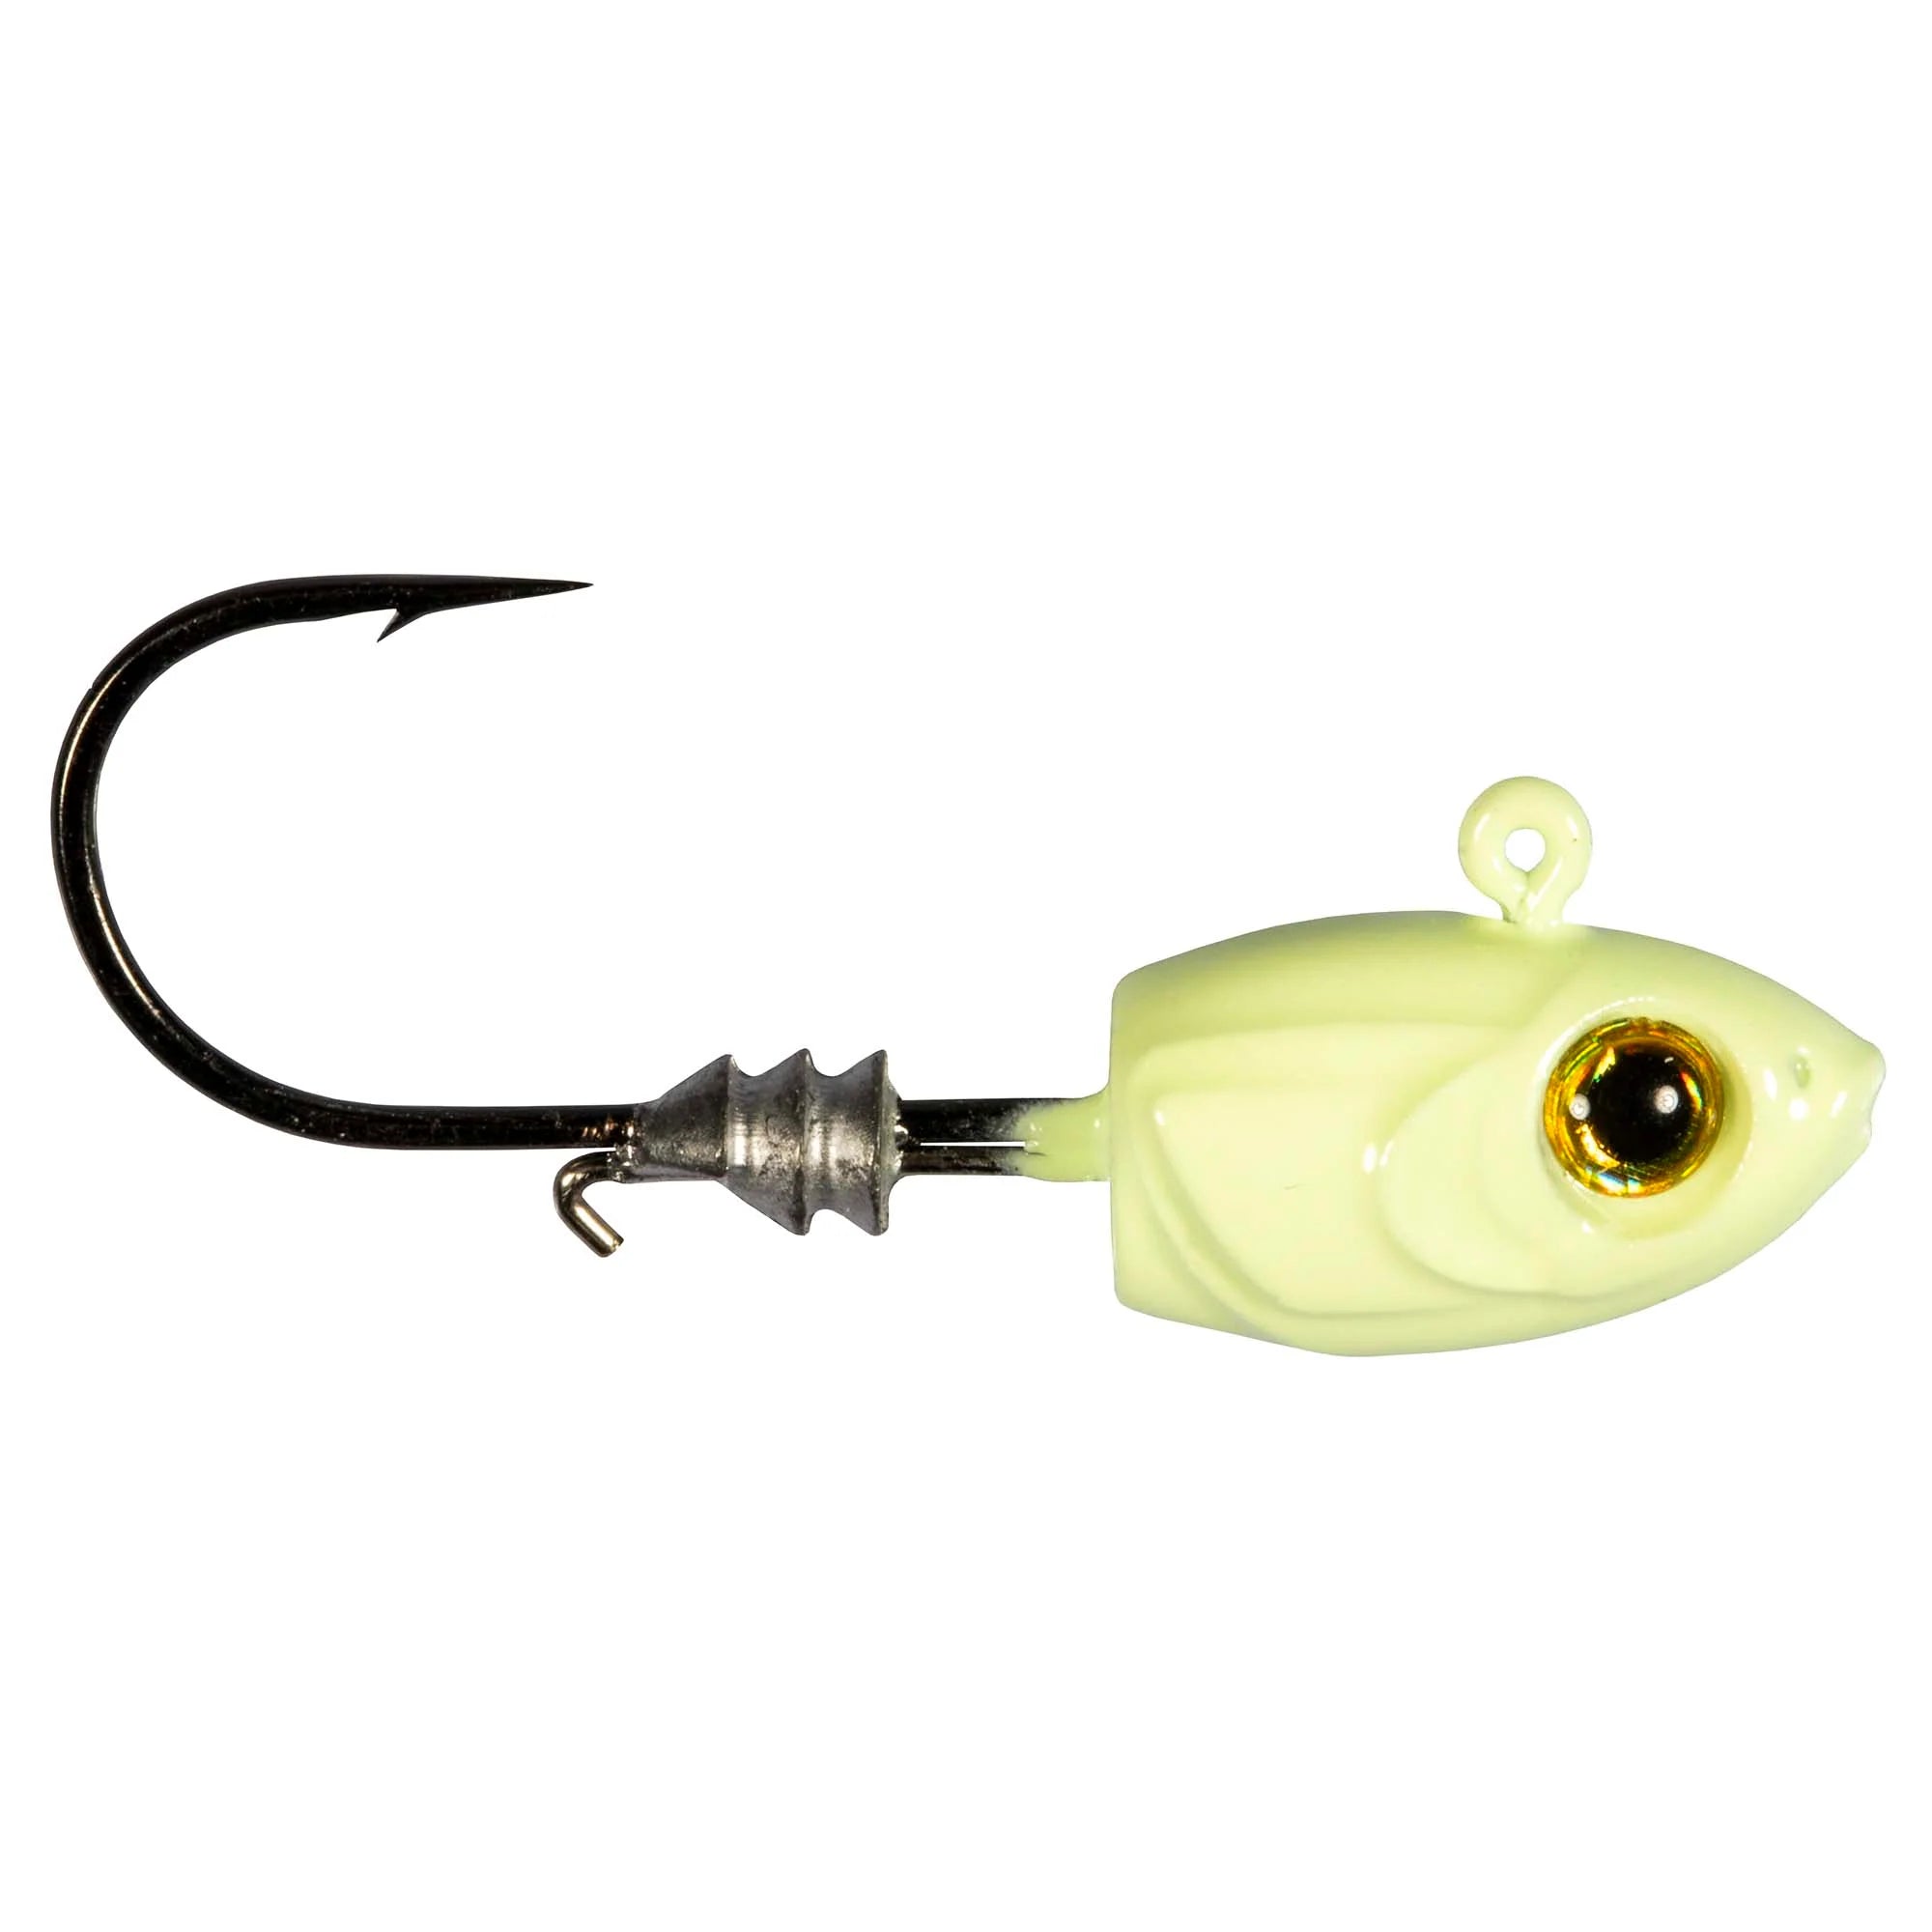 Newest Products Tagged Swimbait - LOTWSHQ